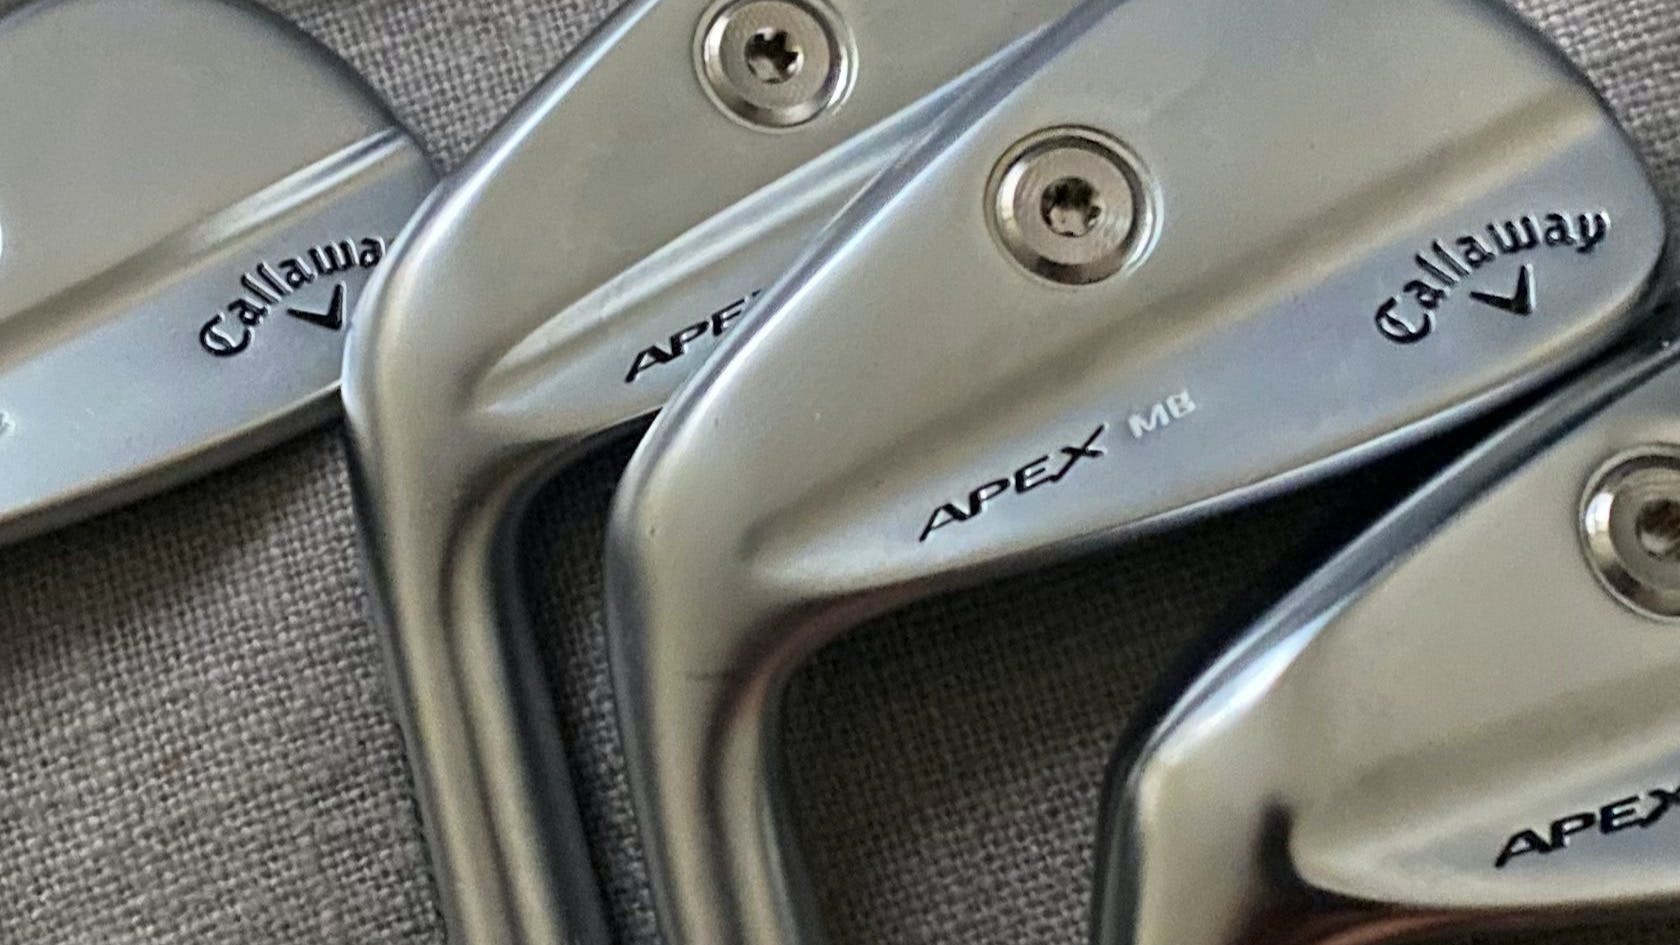 The Callaway Apex Irons.